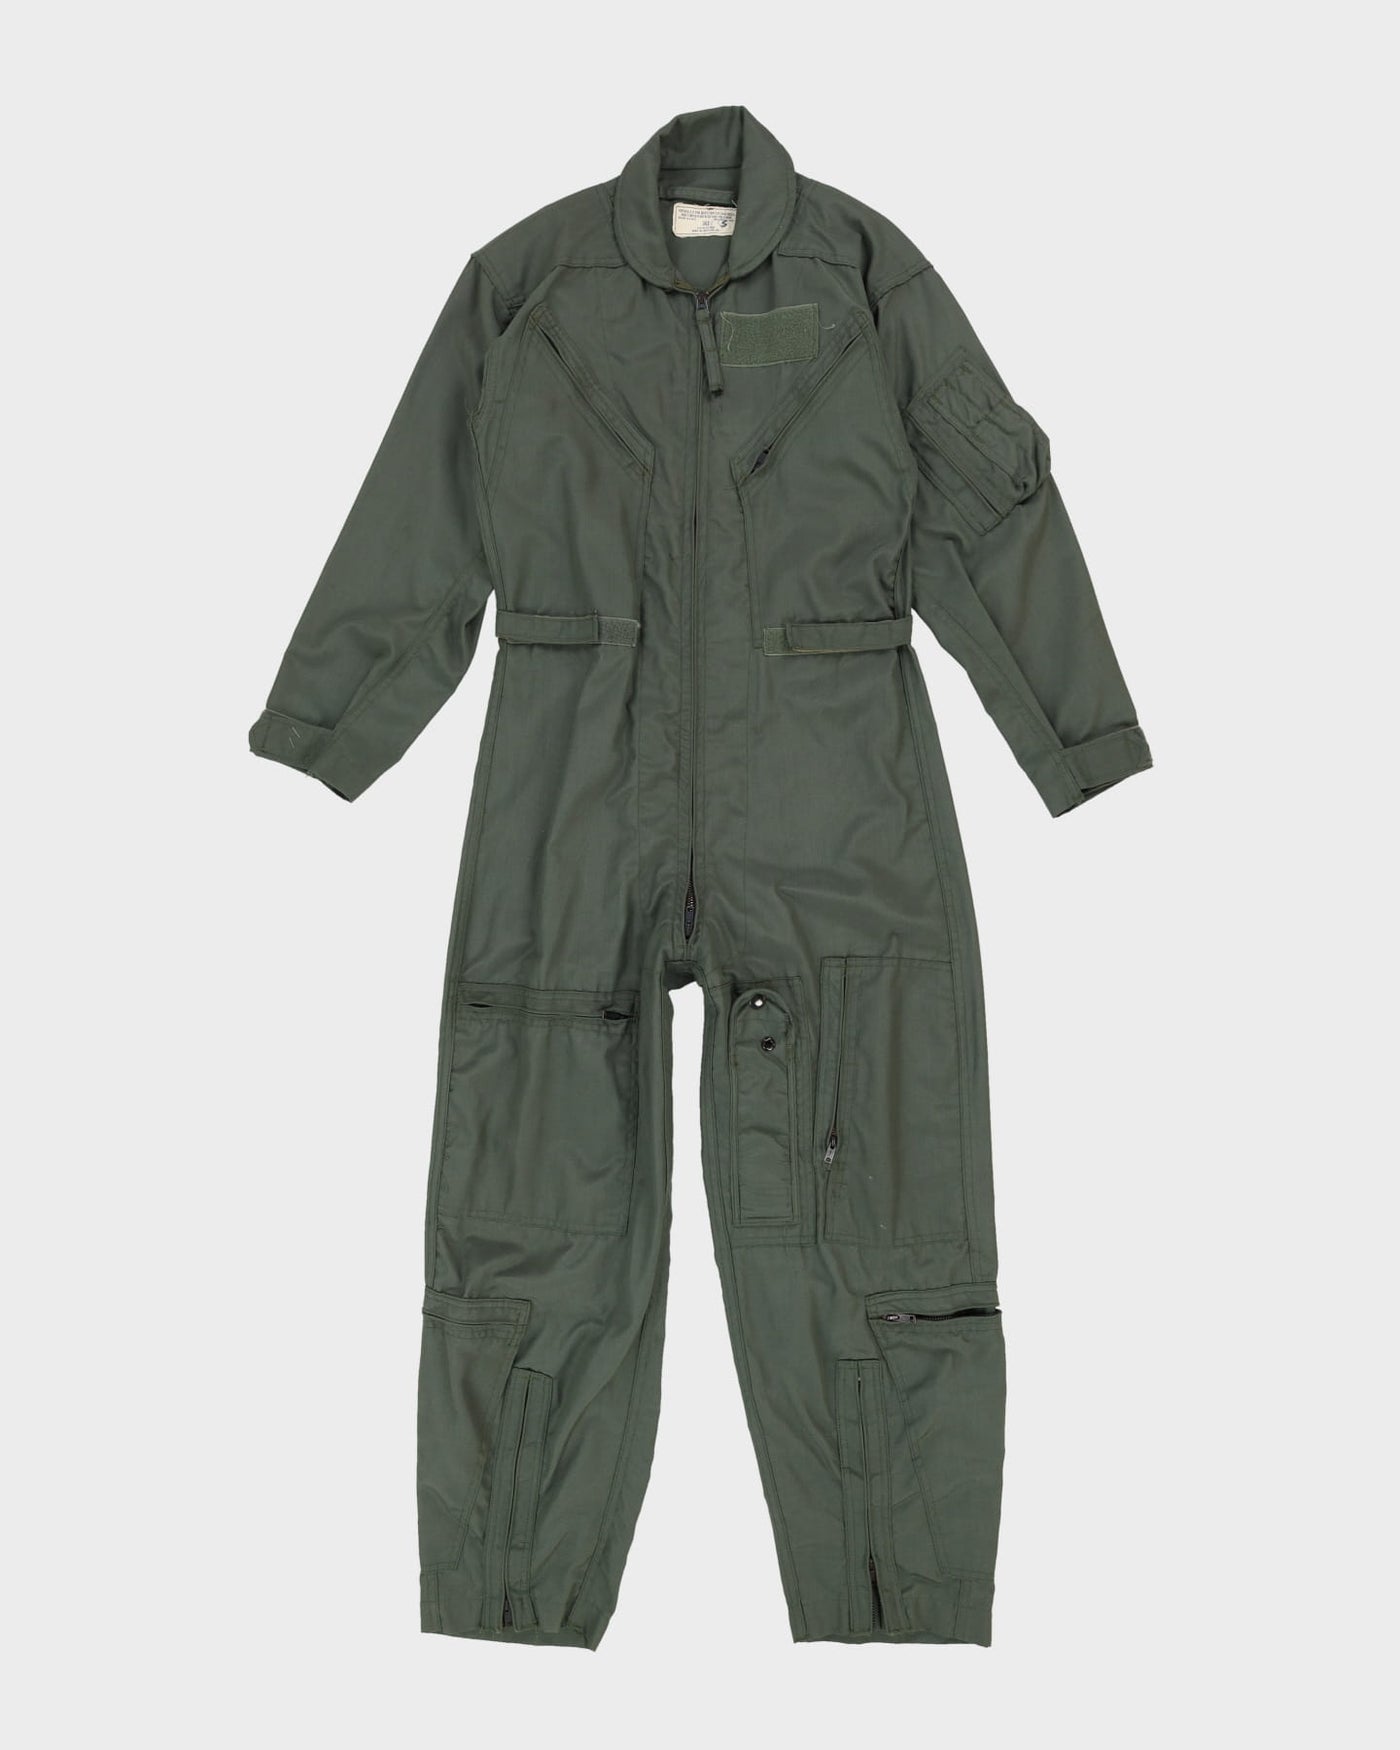 1976 Vintage US Air Force CWU 27/P Flight Suit Coveralls - Small